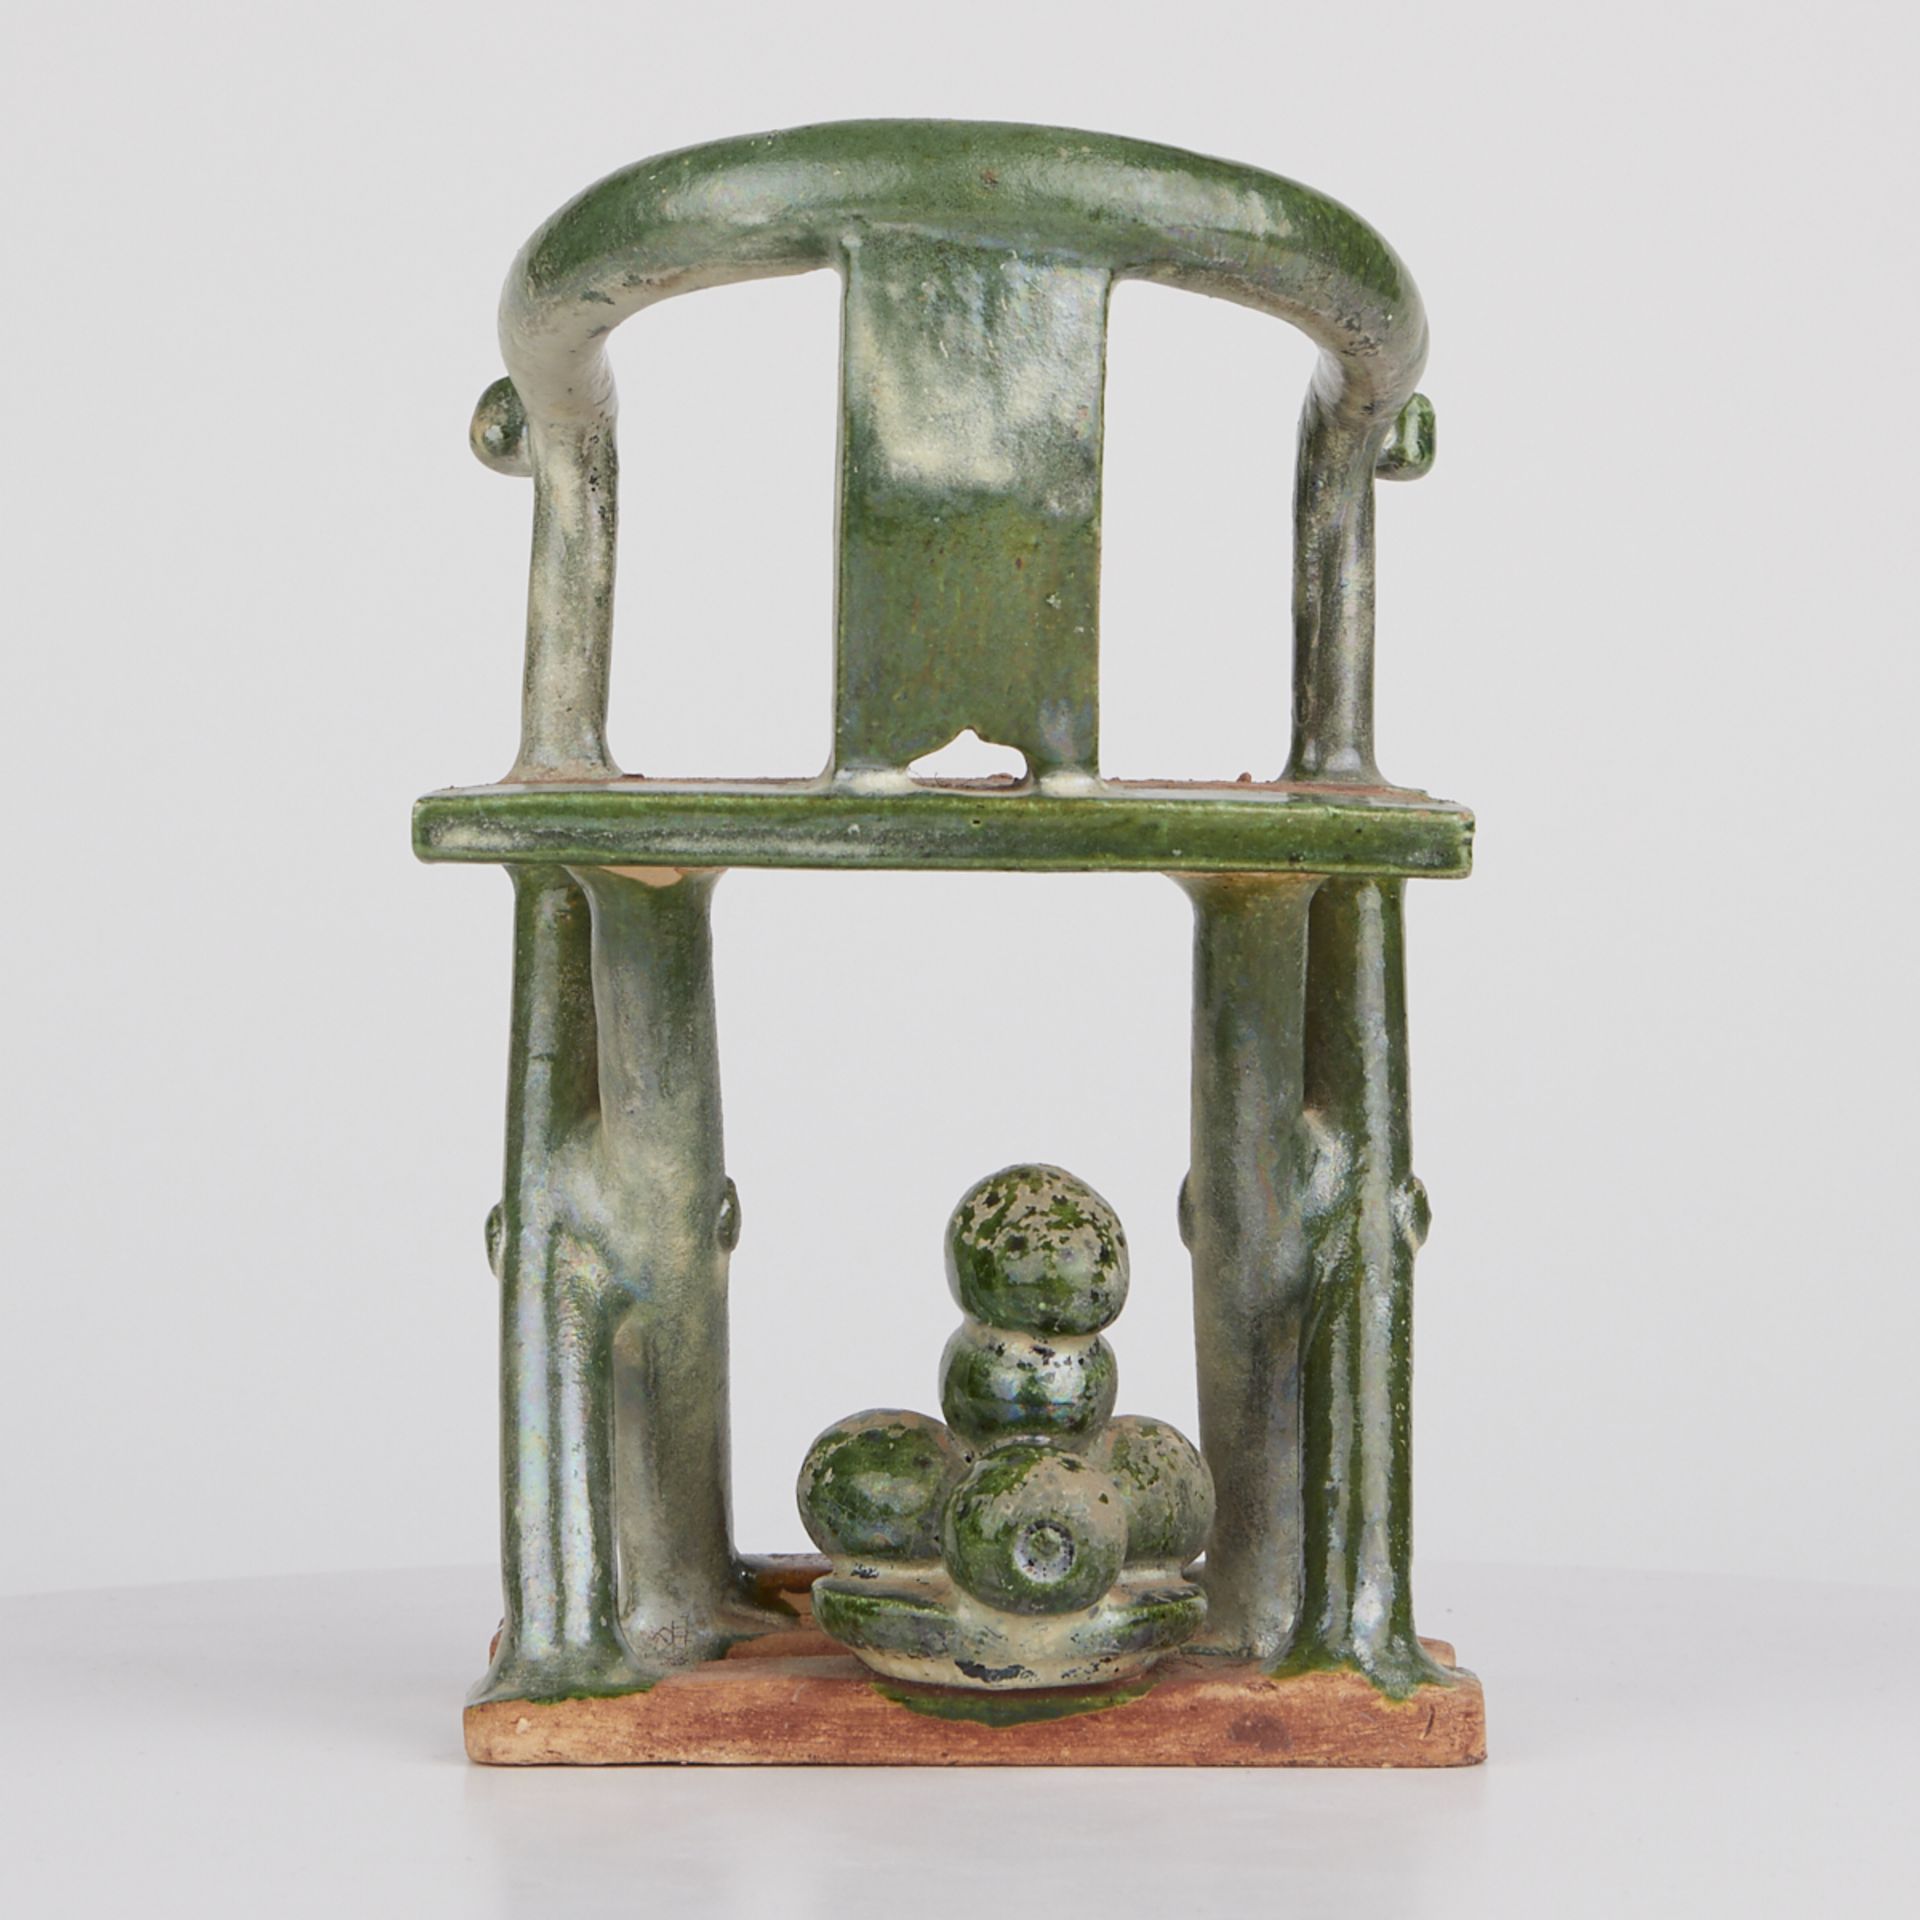 Ming Dynasty Terracotta Tomb Chair - Image 4 of 7